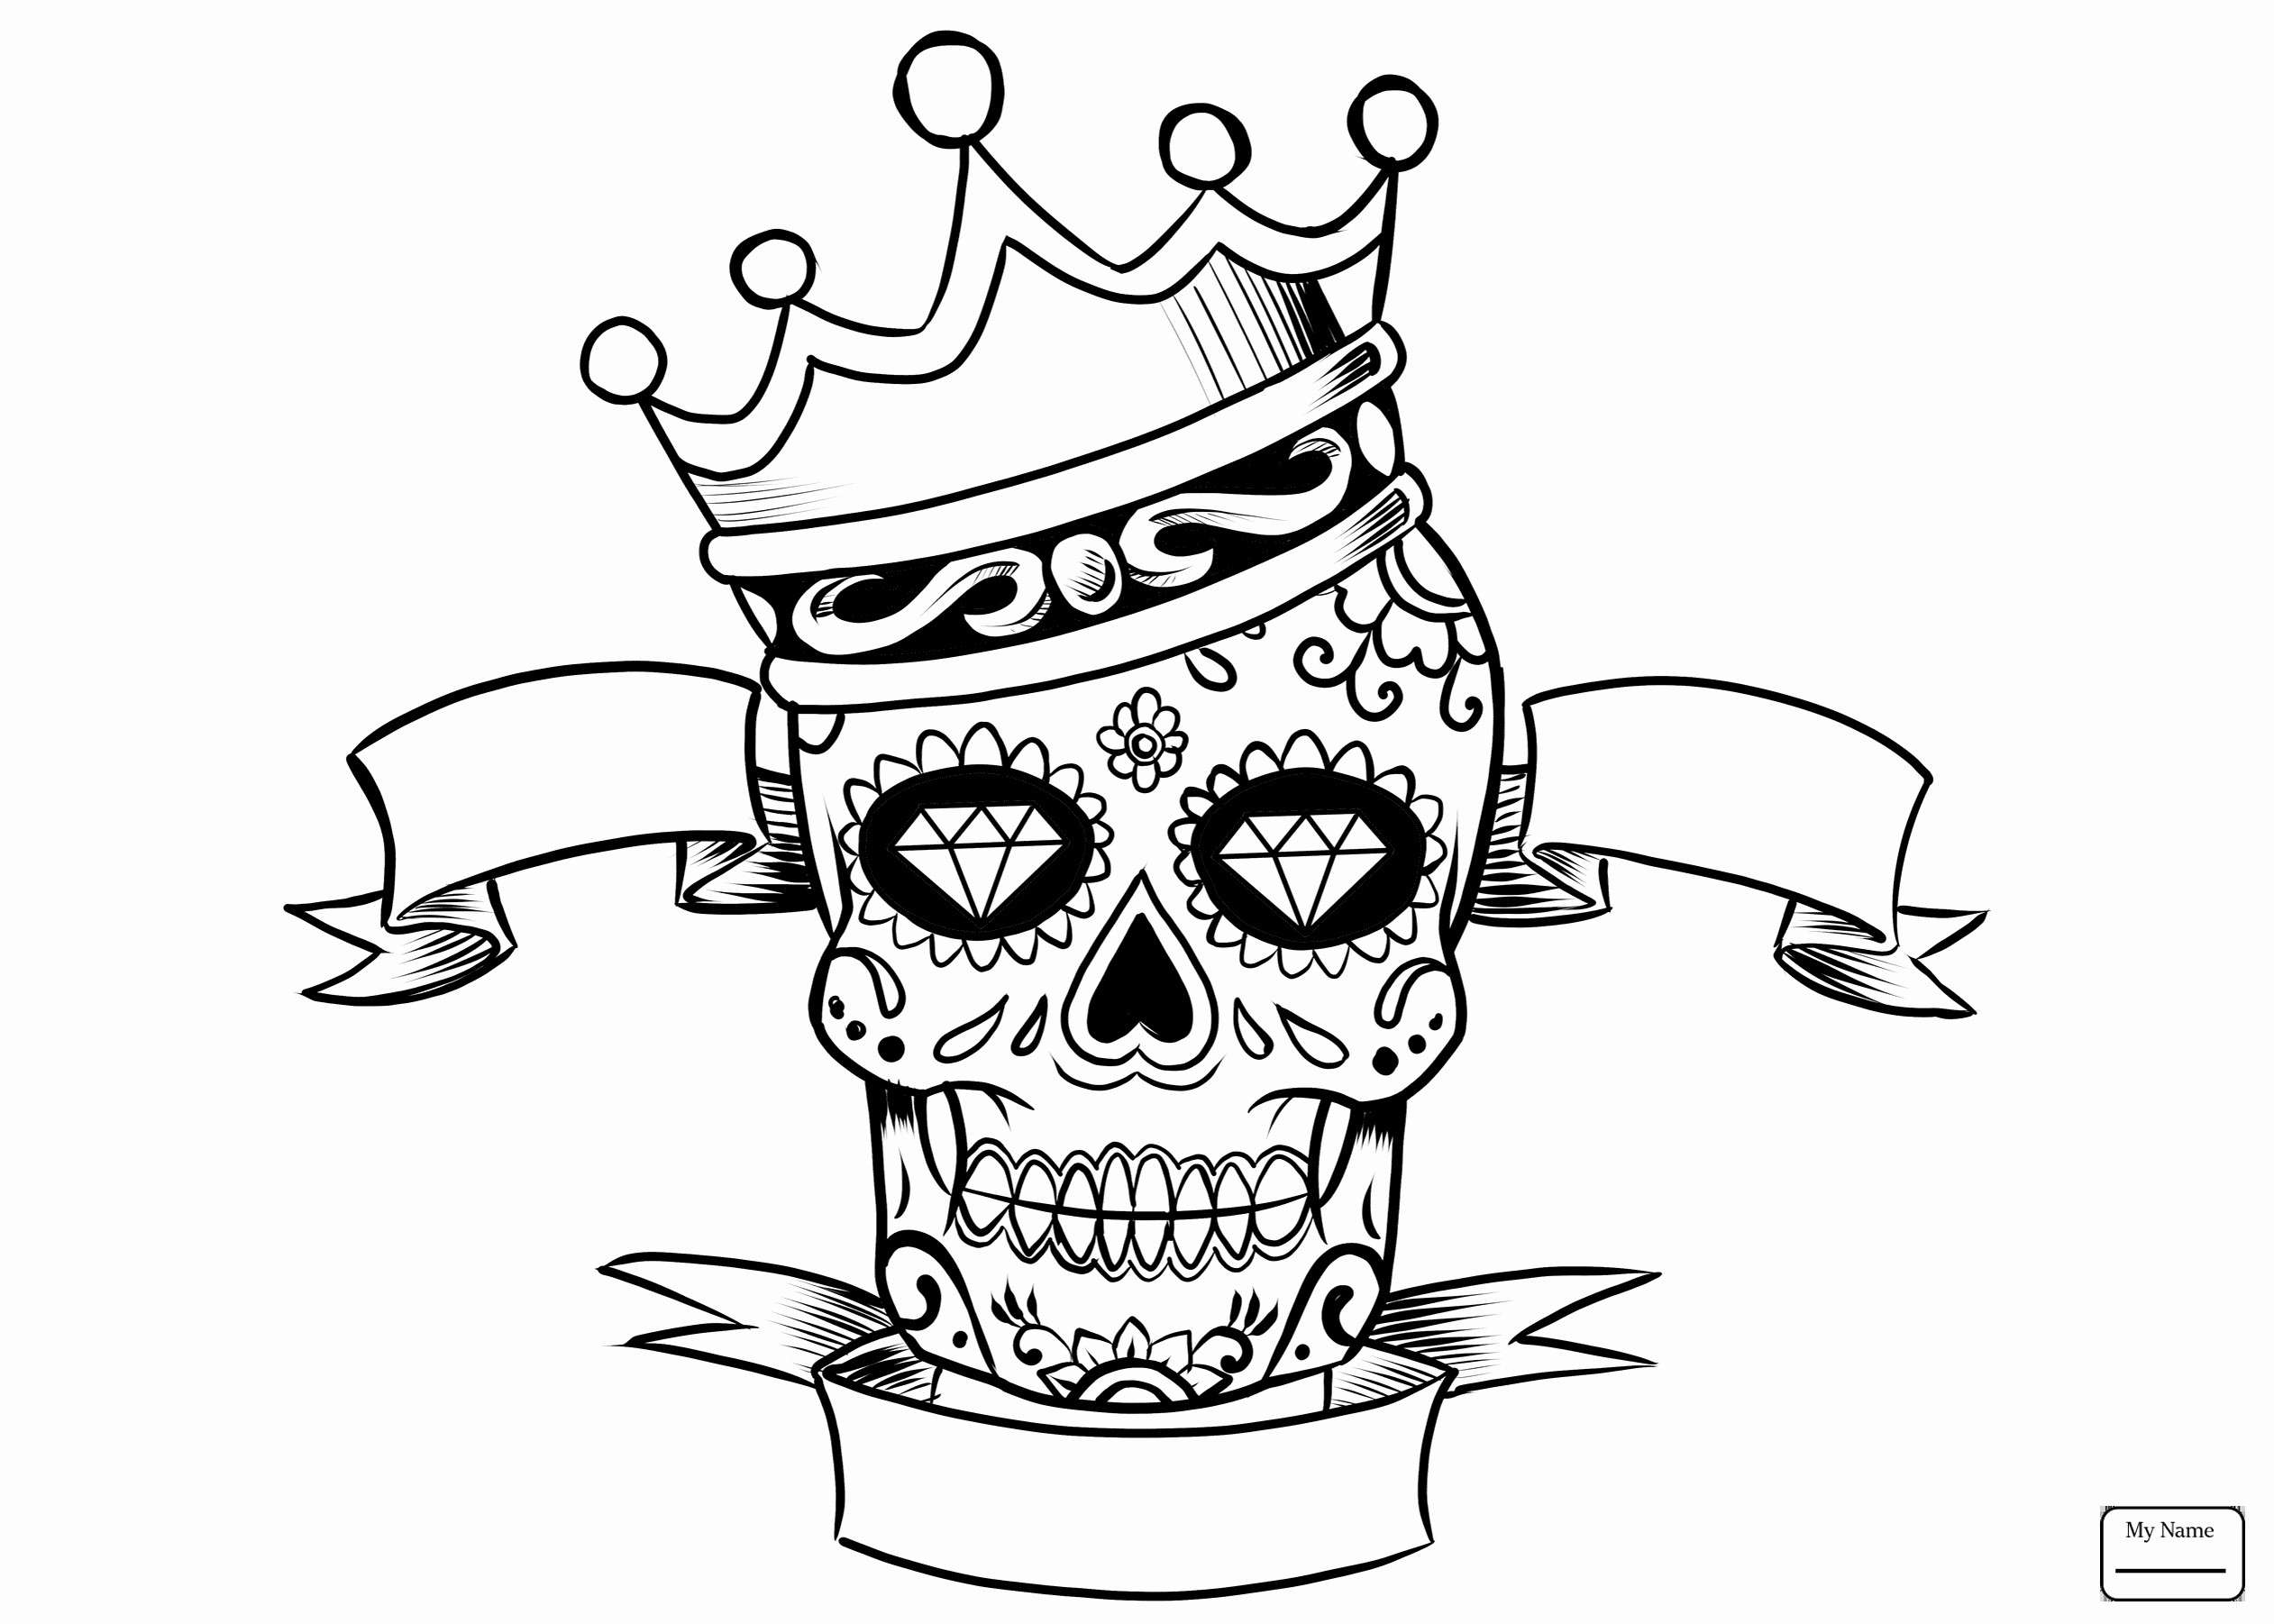 20-rose-and-skull-coloring-pages-for-adults